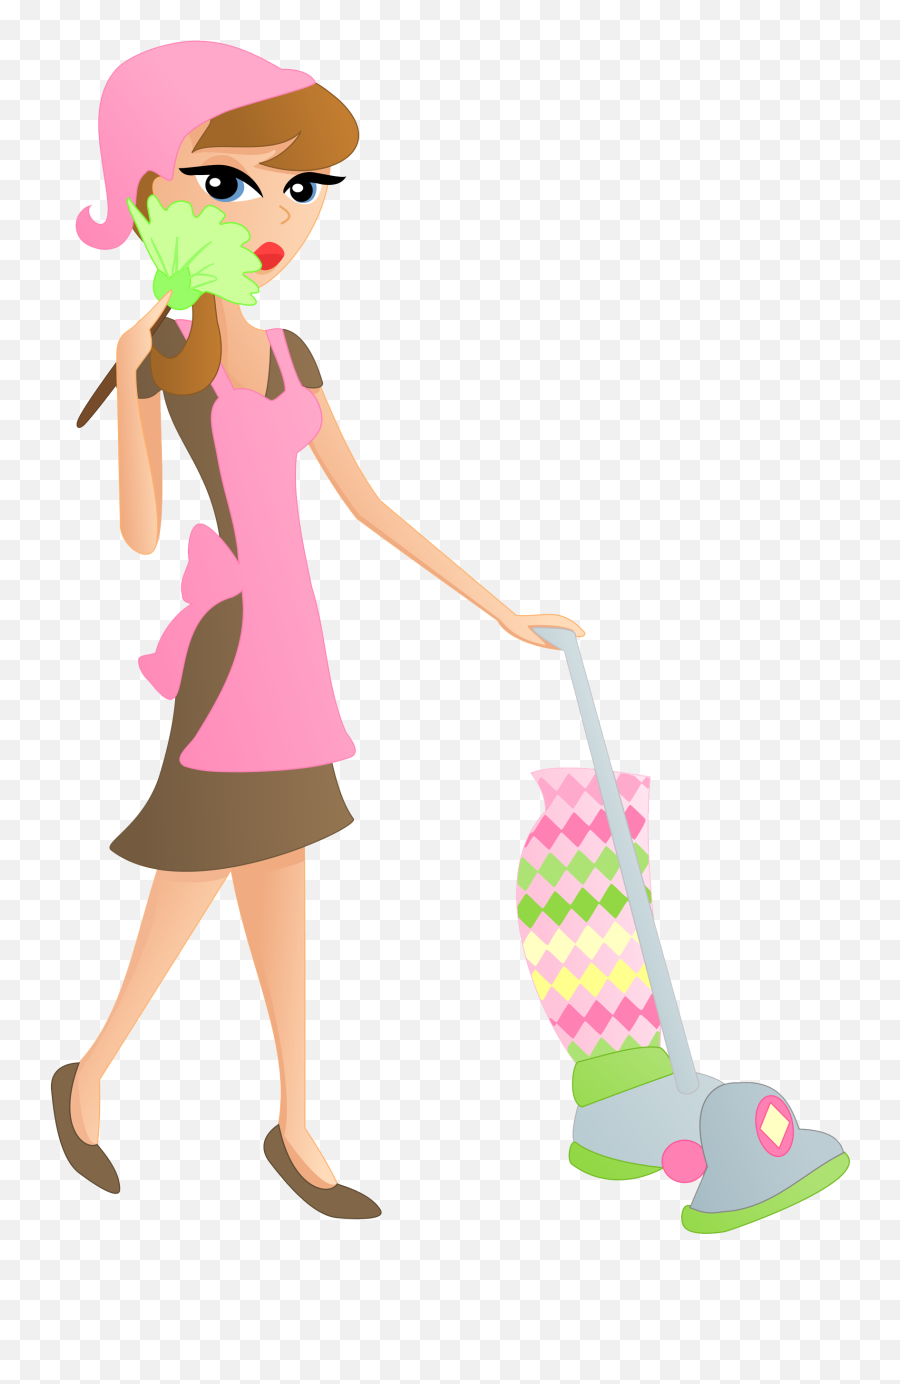 Cleaning Lady Clip Art Free 35 Images Cleaning Clipart 10 Emoji,Cleaning Services Clipart